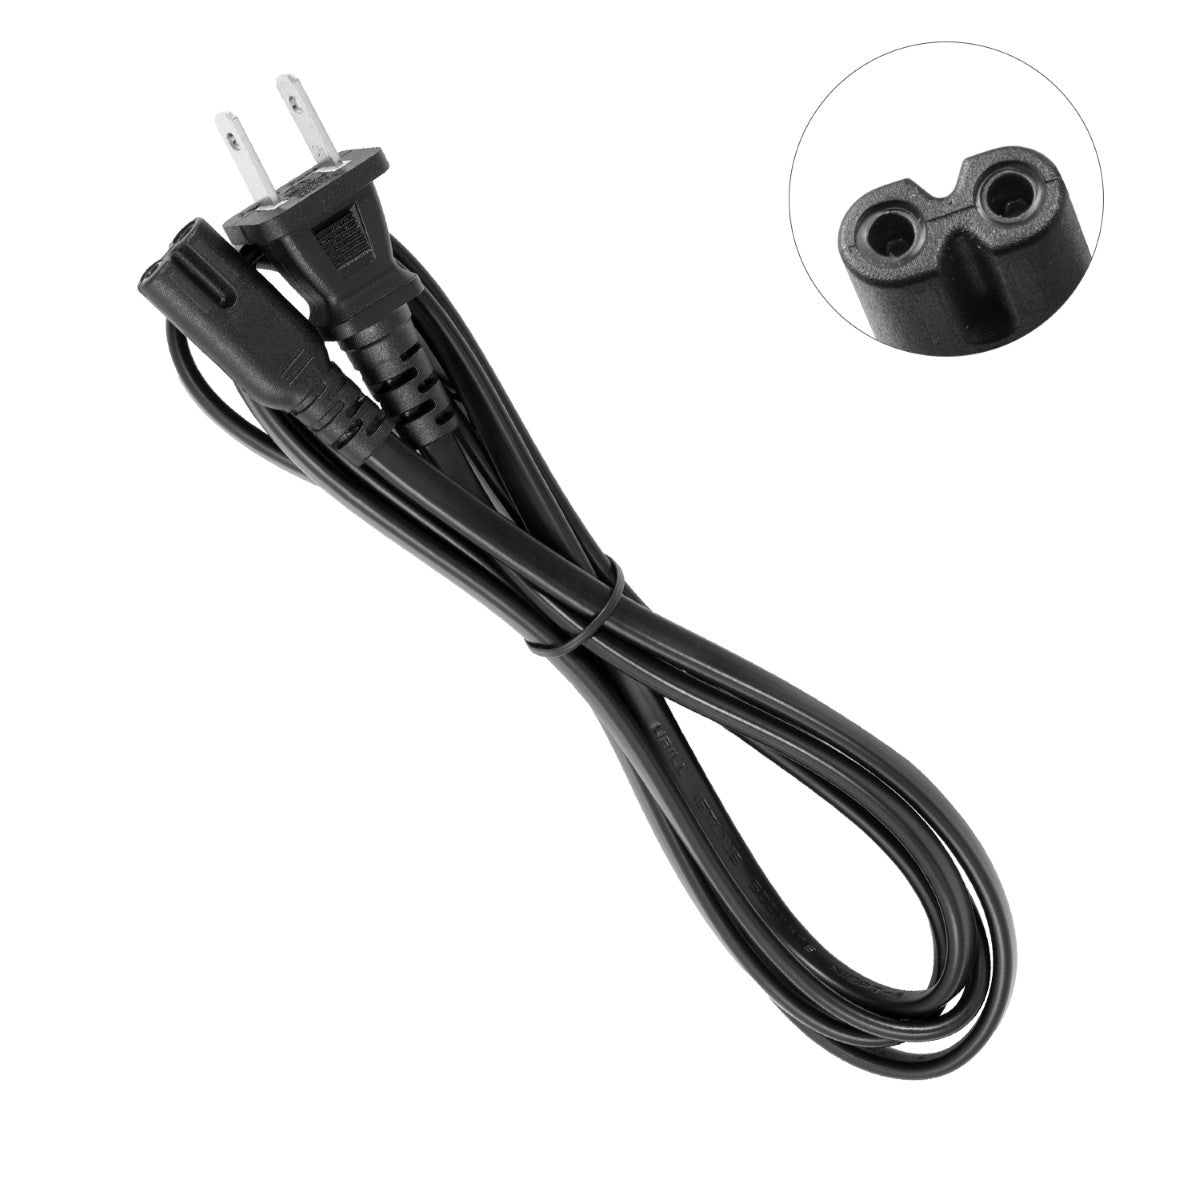 Power Cable  for HP ENVY 6055/6055e Wireless All-in-One Printer.